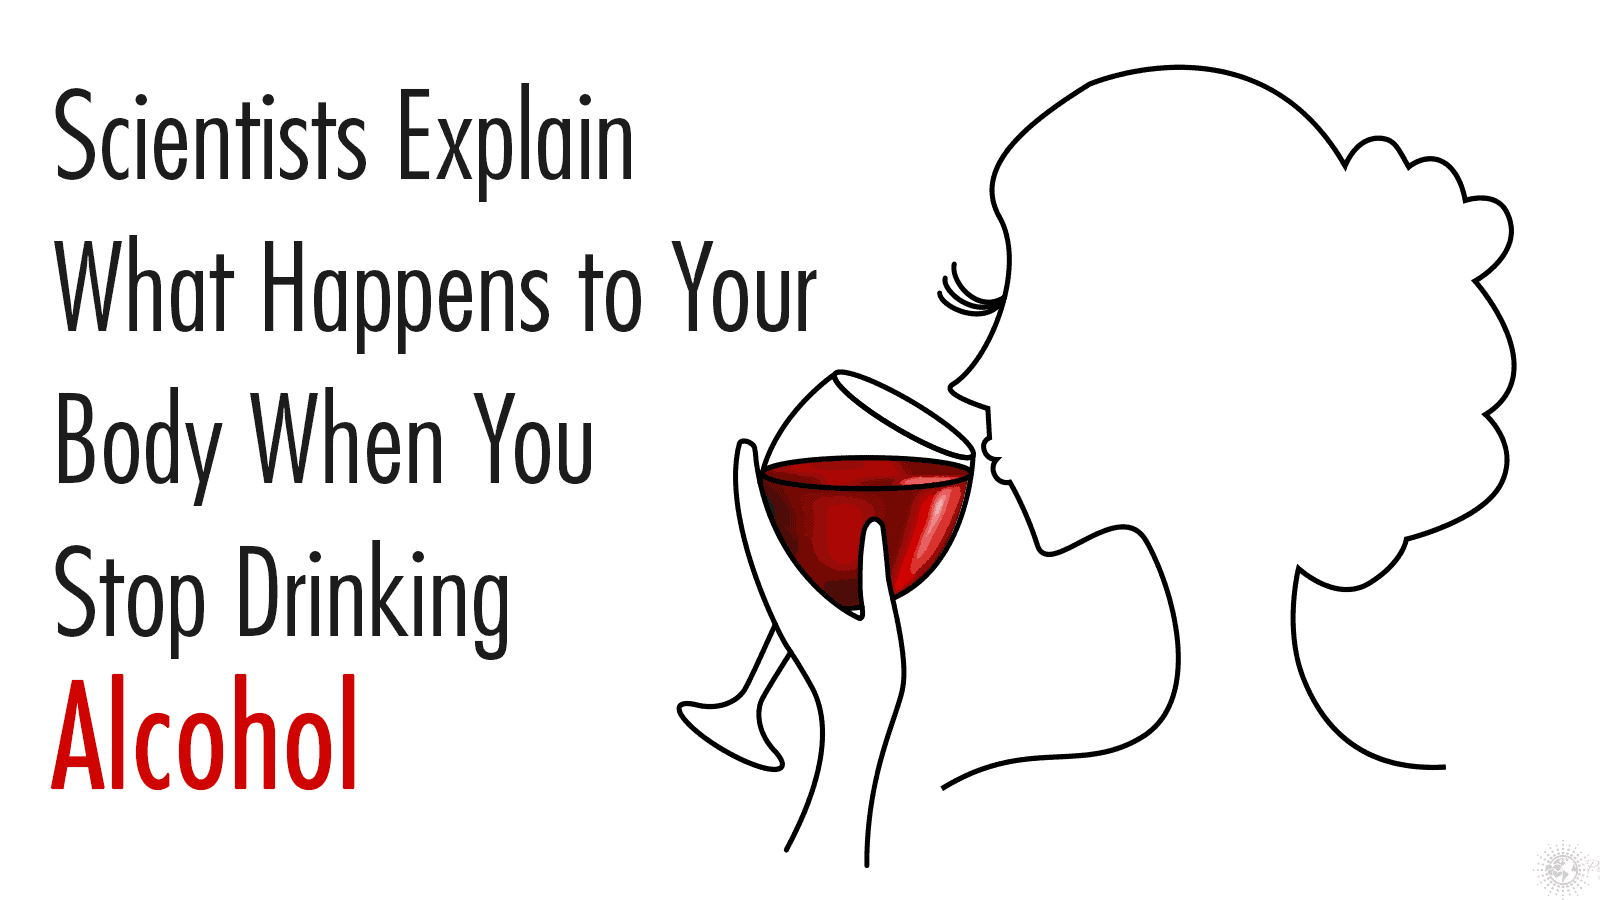 What Happens To Your Body When You Stop Drinking Alcohol?